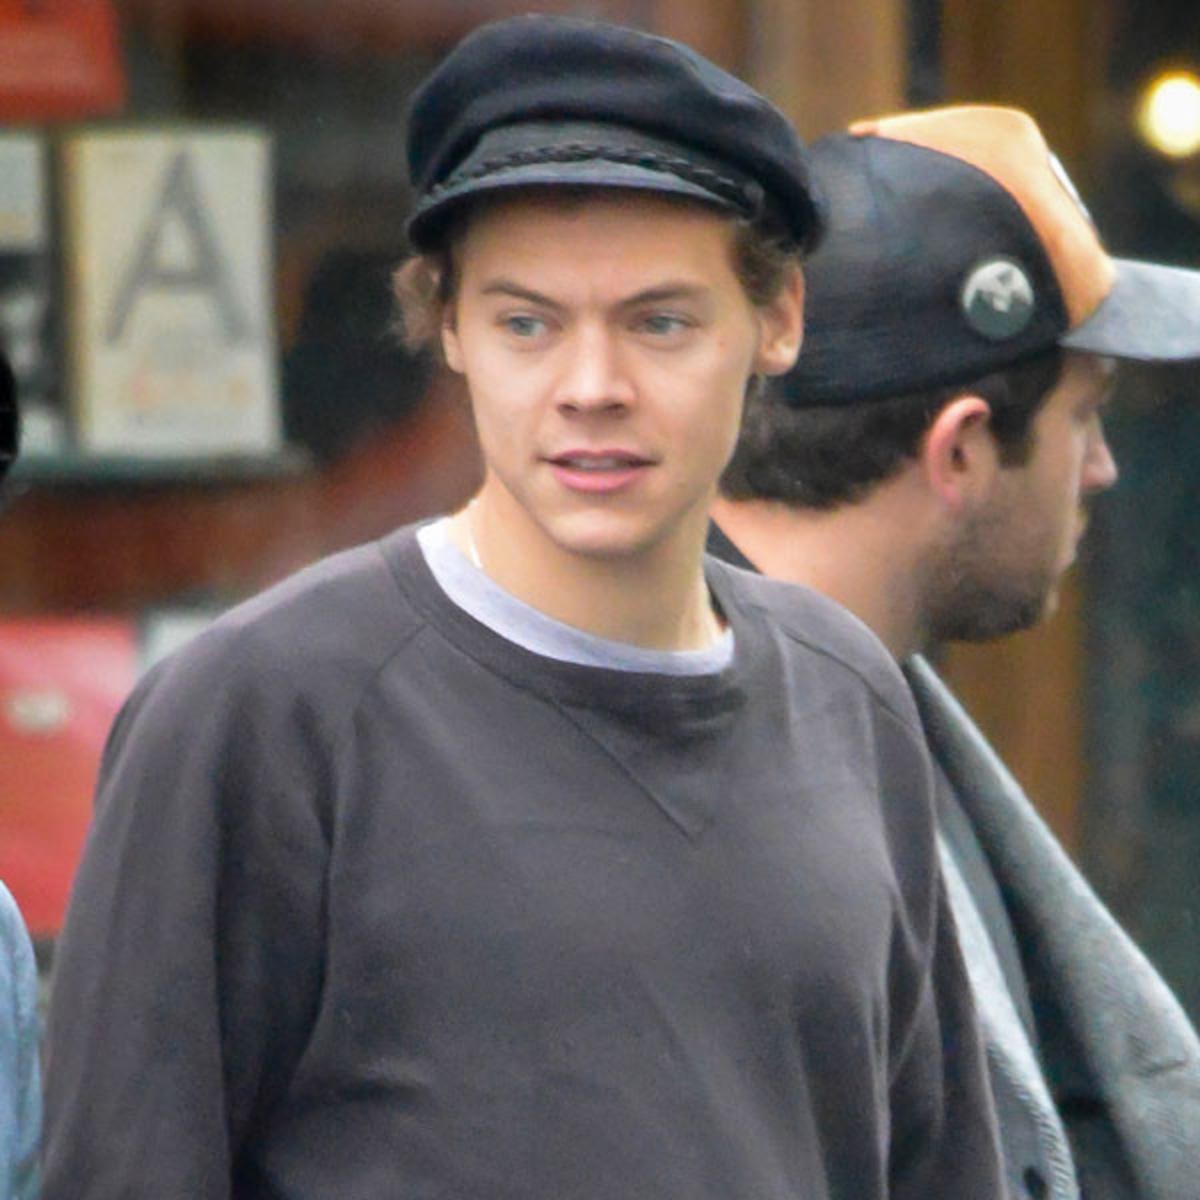 Here's What Harry Styles Looks Like Now With Short Hair - E! Online